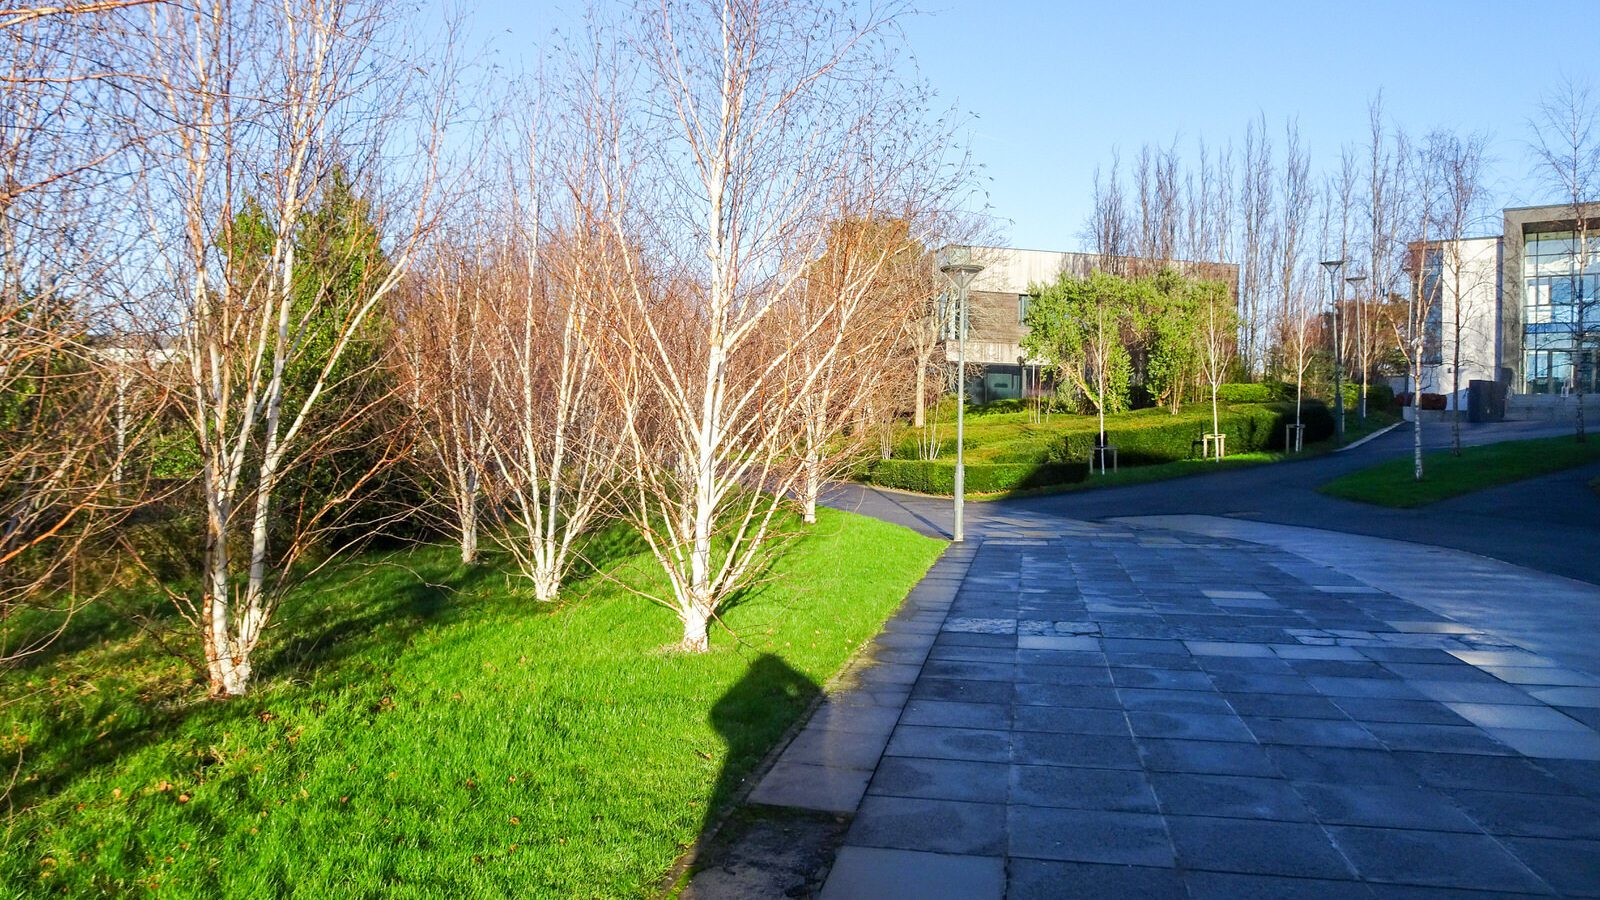 RANDOM IMAGES OF THE UNIVERSITY OF DUBLIN CAMPUS [MY MOTHER WHO IS 104 IN MAY DID NOT WANT TO COME WITH ME AS IT WAS TOO COLD]-226723-1